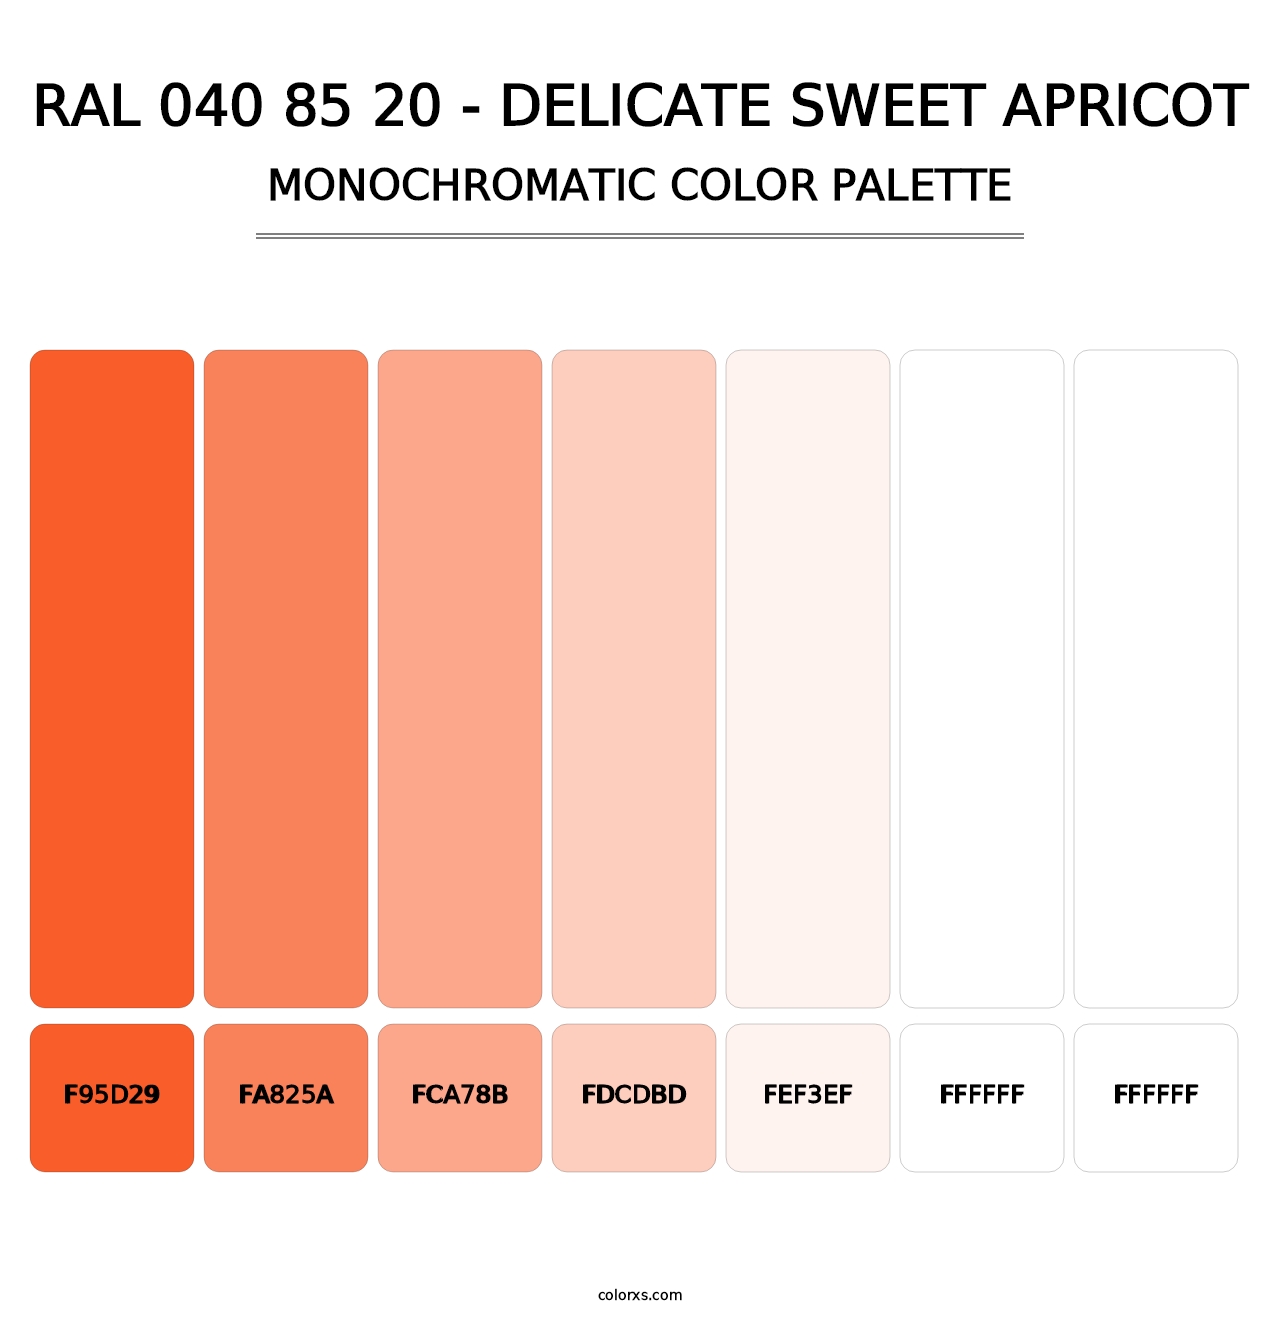 RAL 040 85 20 - Delicate Sweet Apricot - Monochromatic Color Palette